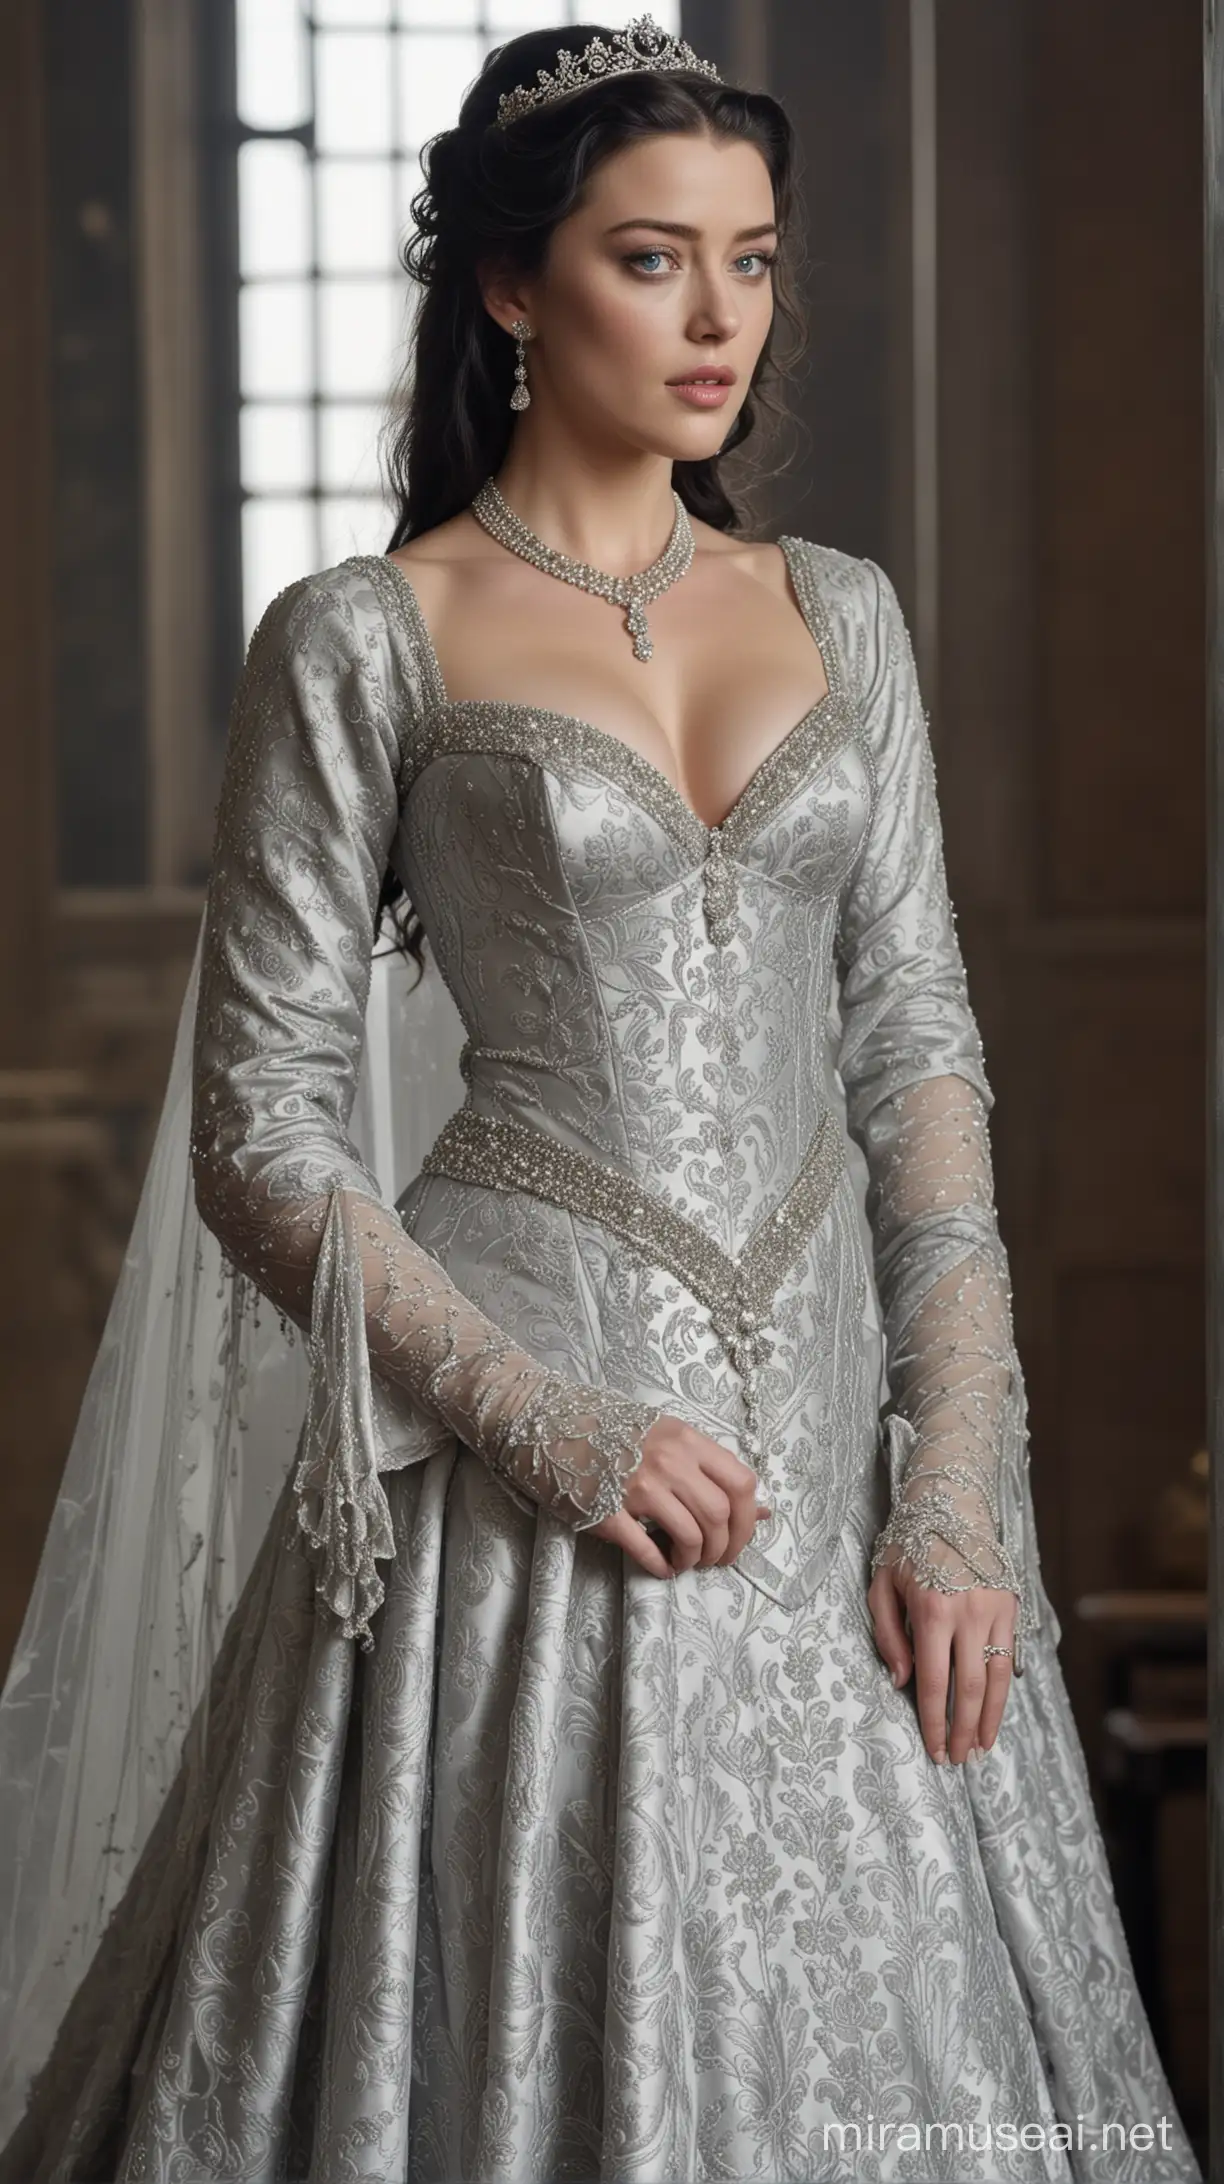 Amber Heard with black hair and violet color eyes as a medieval fantasy queen wearing a Tudor era damask gown of soft silver grey color so fine and soft that it shimmers like frosted glass. The gown is beautiful, a true work of art with full sleeves and lavish decorations. The gown was tight and snug which clung to her generous curves and shows her hourglass figure with high neckline. The bodice was fully made of soft grey colour damask and silver satin features with fine lining done in white satin. She's also wearing a platinum tiara and pearl necklace